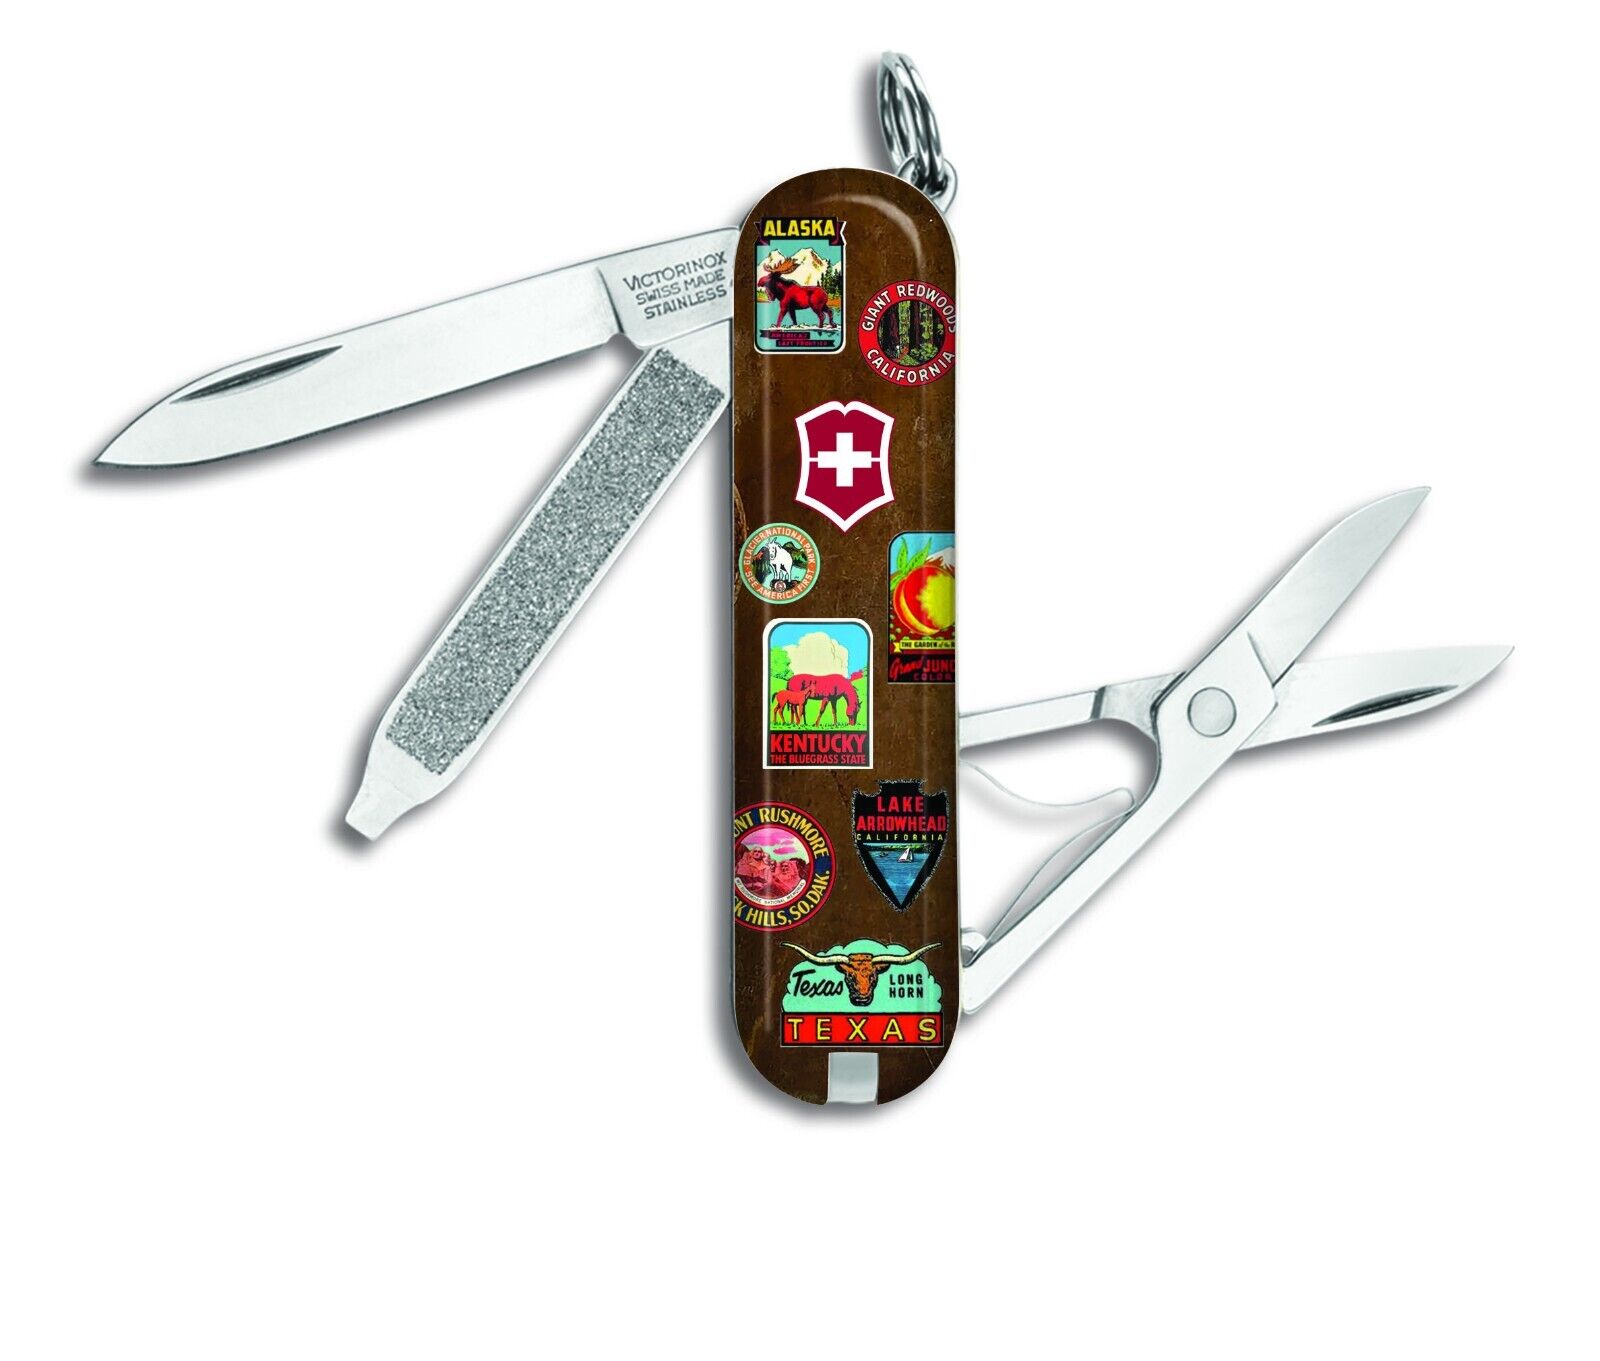 VICTORINOX SWISS ARMY KNIVES VINTAGE LUGGAGE TRAVELER CLASSIC SD KNIFE